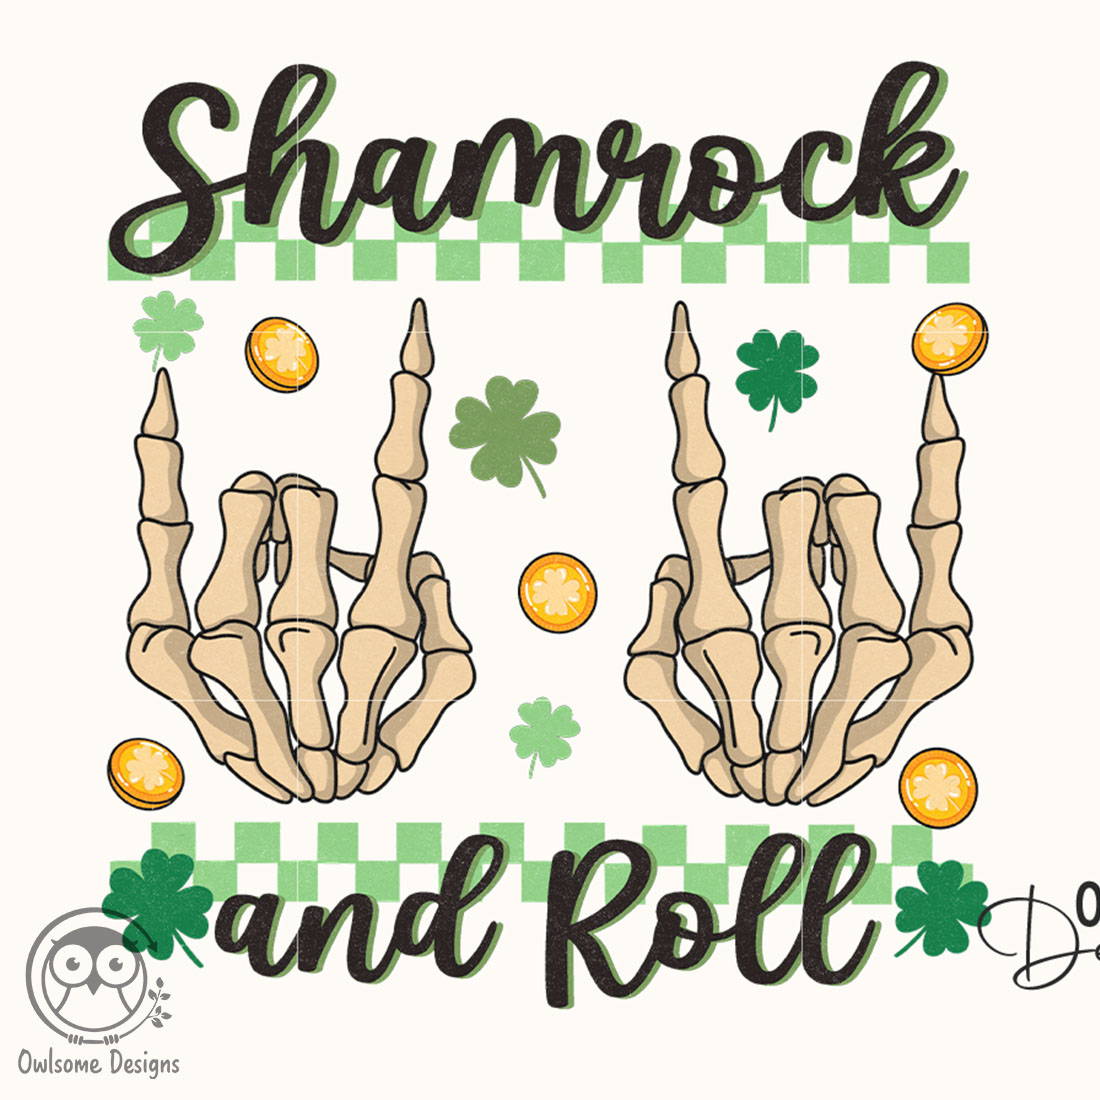 Shamrock And Roll Patricks Day cover image.